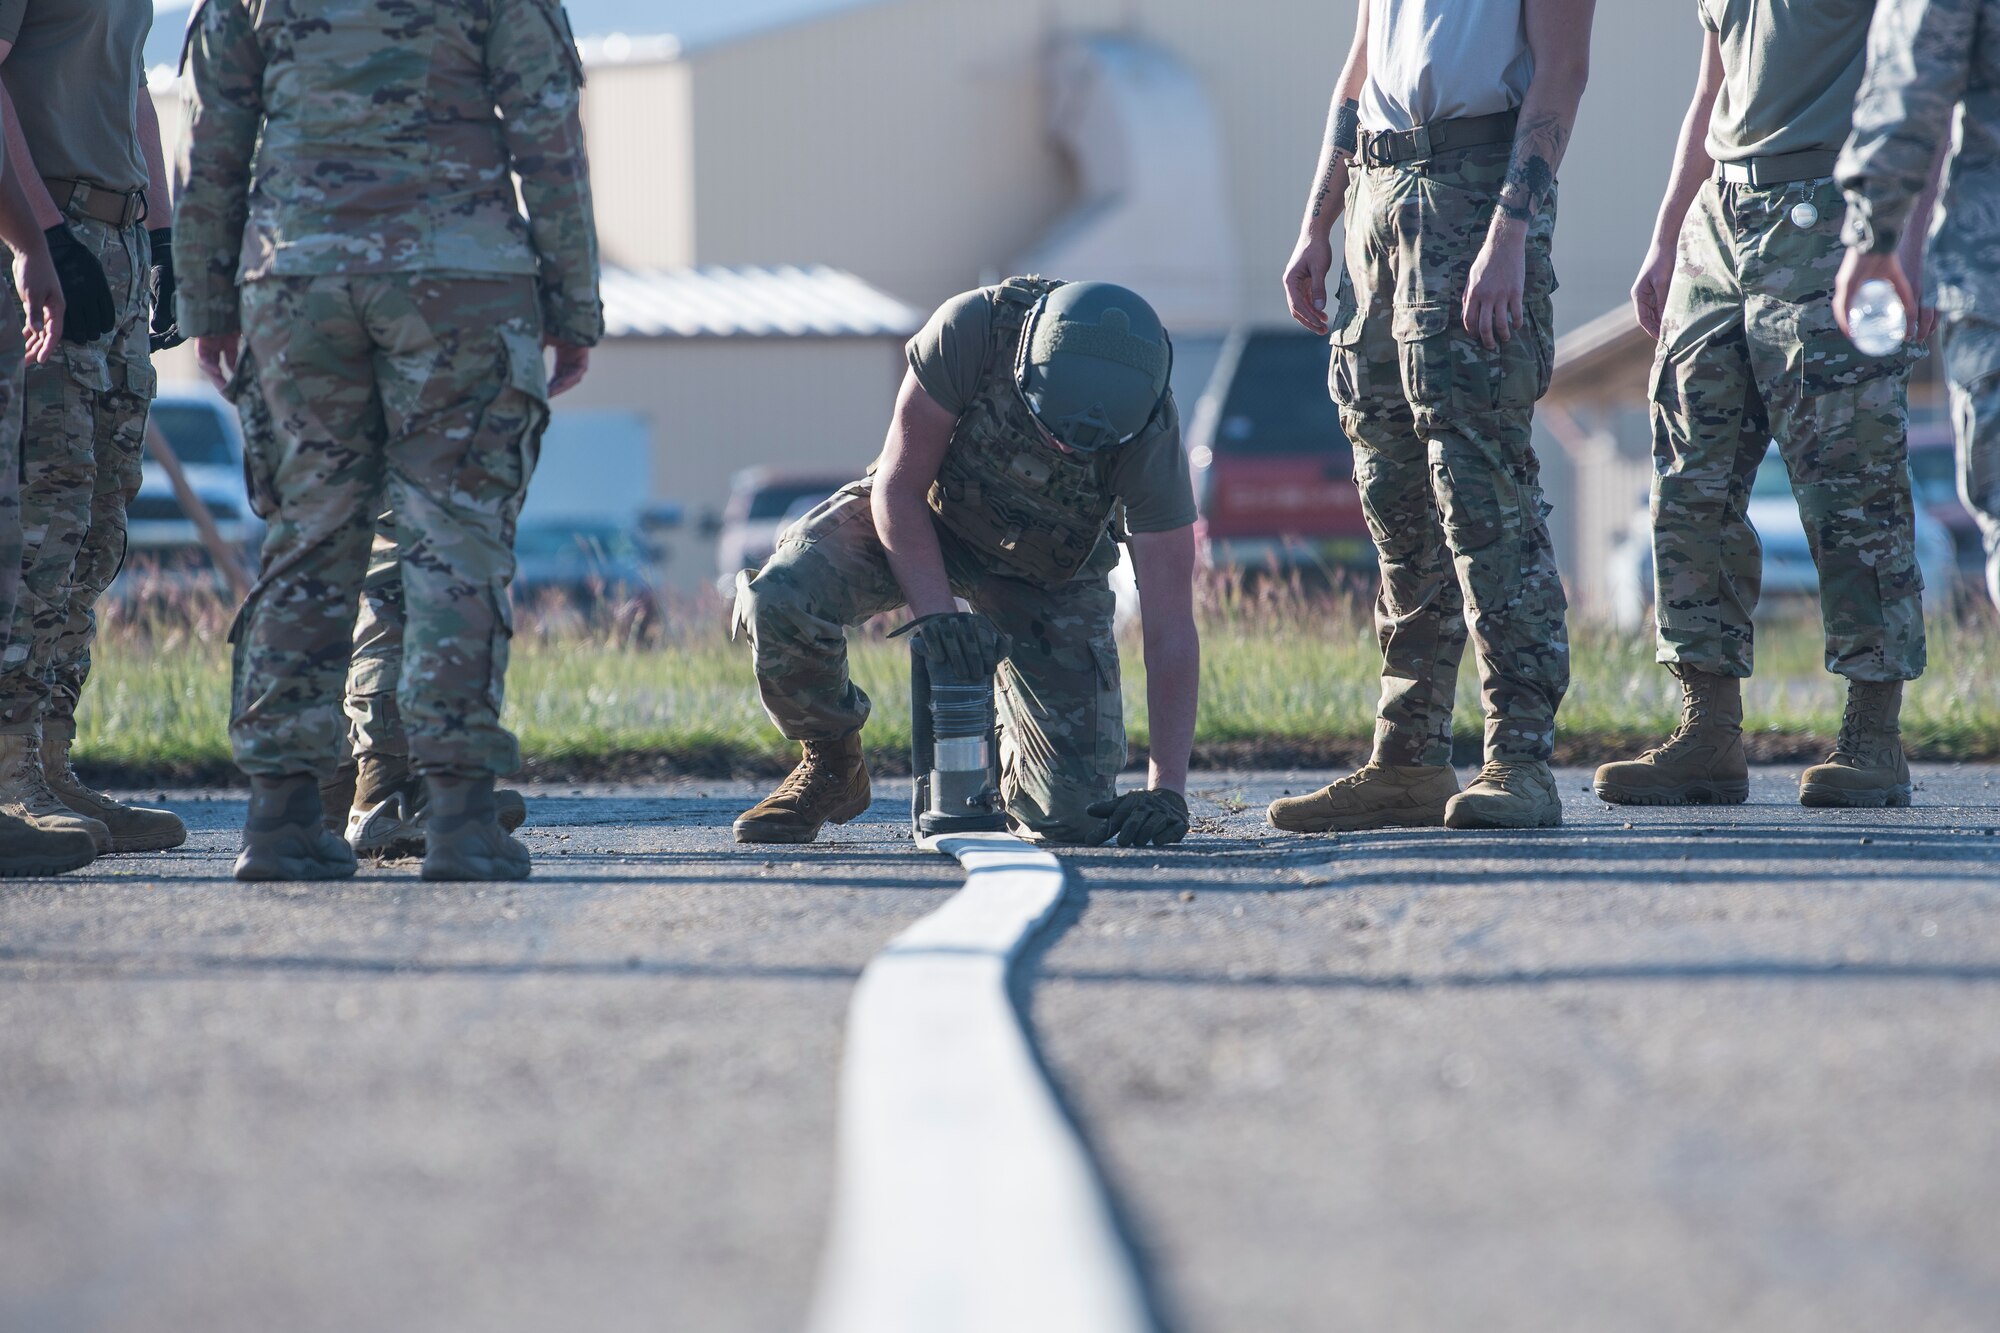 Airman 1st Class Caleb McDonald, 27th Special Operations Logistics Readiness Squadron fuels operator, rolls up a fuel hose as teammates watch during the Forward Air Refueling Point tryouts at Cannon Air Force Base, N.M., October 9, 2019. The hose is only folded after members squeegee out all remaining fuel so it can be carried to a sled. (U.S. Air Force photo by Senior Airman Vernon R. Walter III)